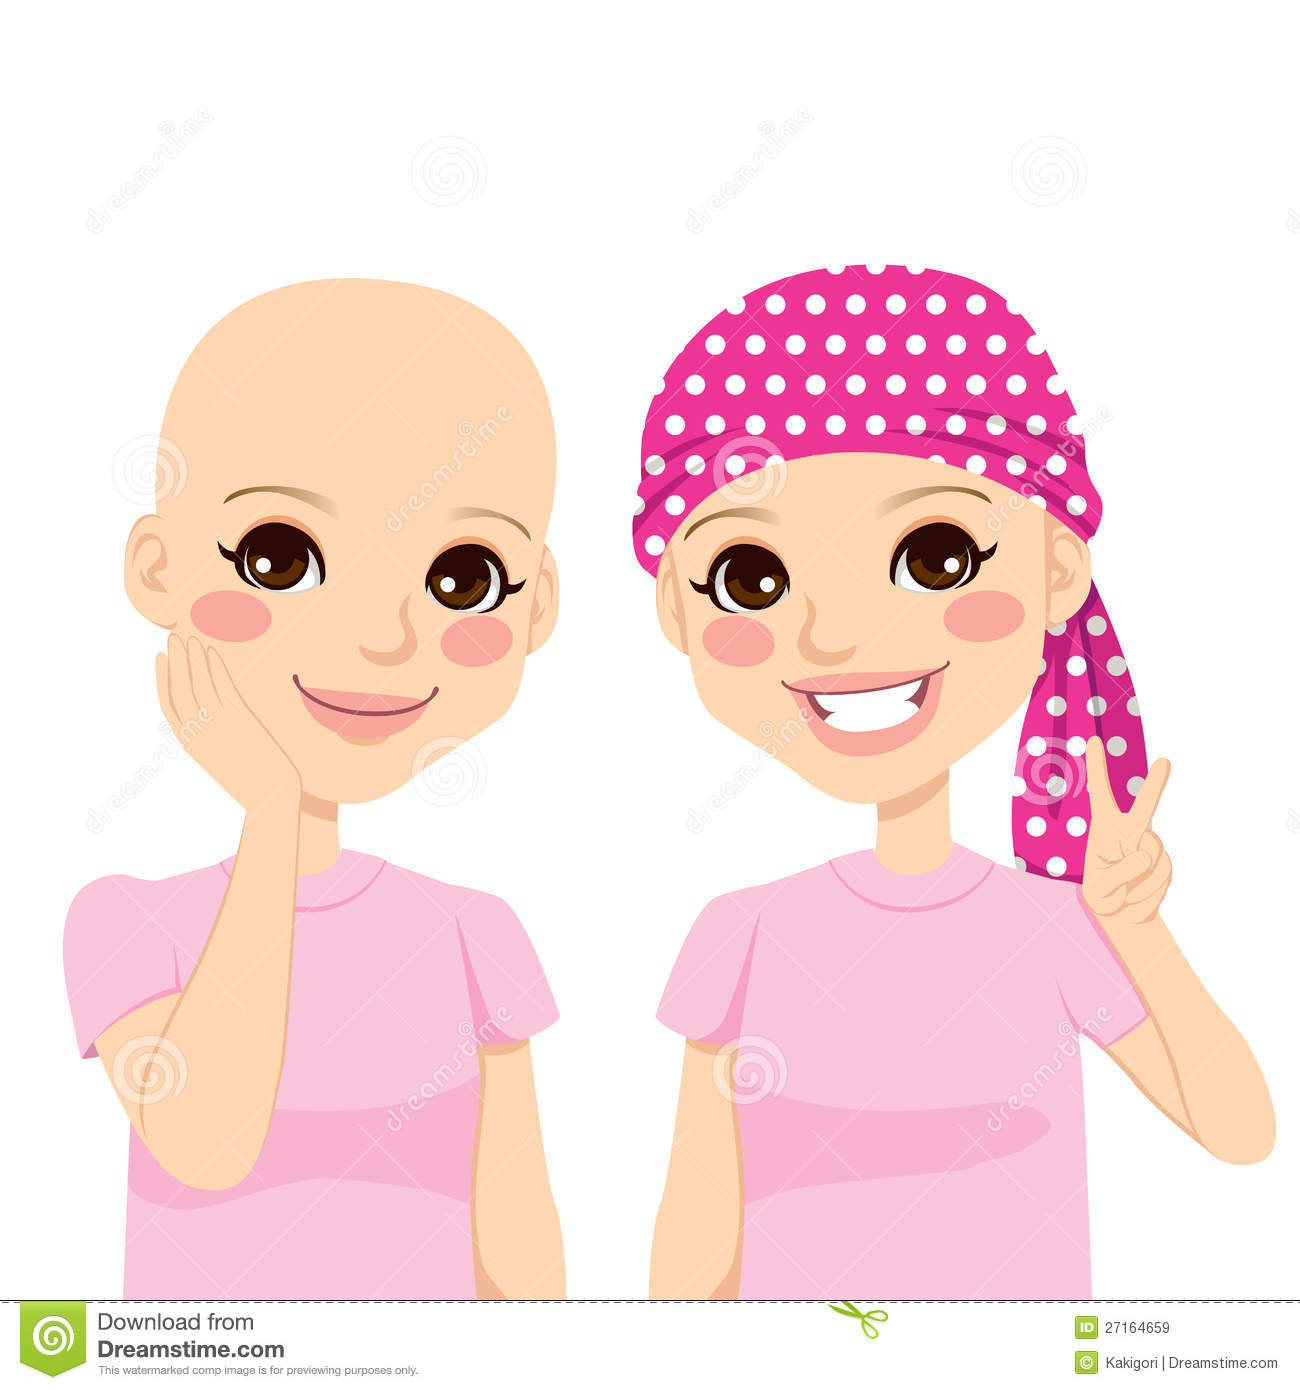 cancer clipart cancer patient